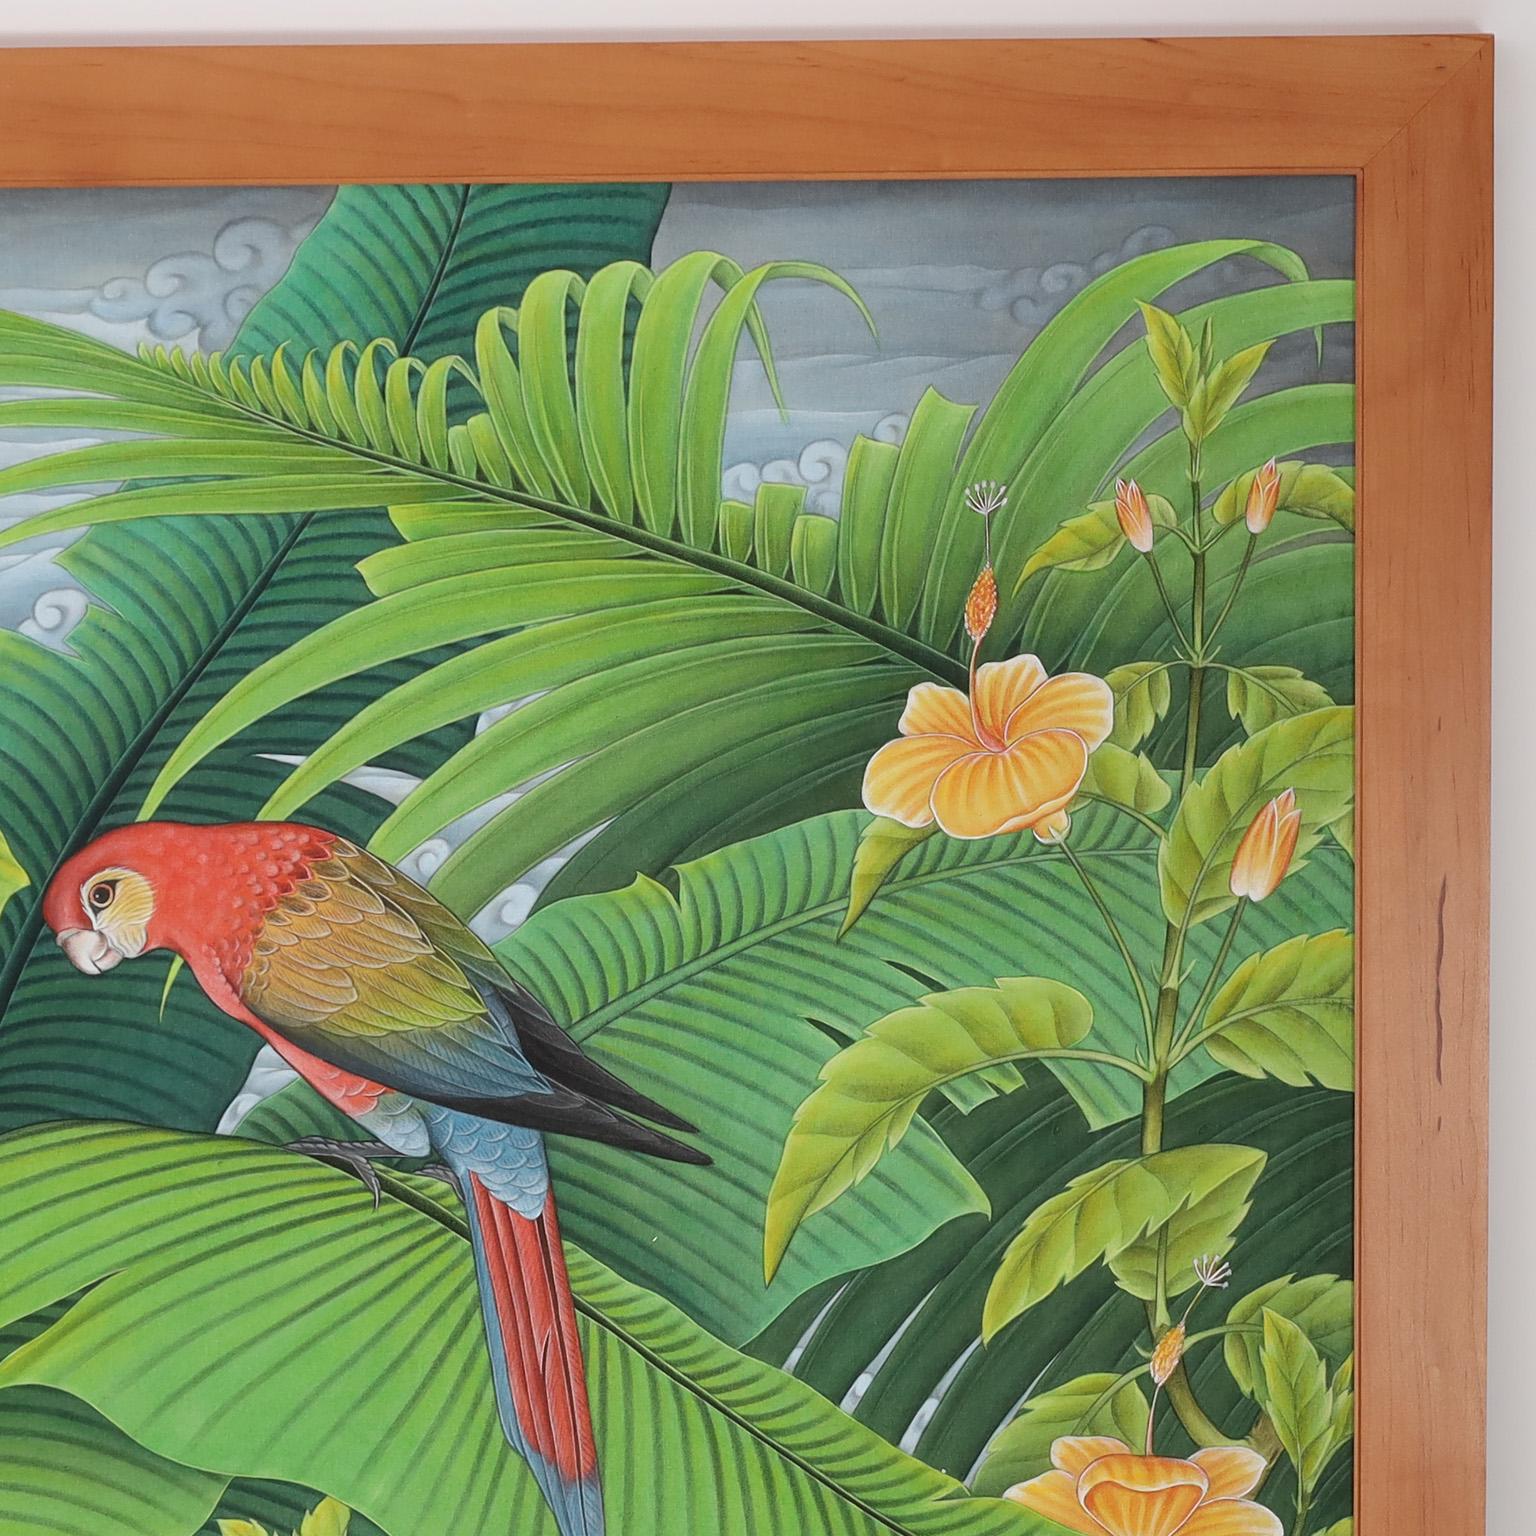 Mid-Century Modern Painting on Canvas with Parrots and Flowers